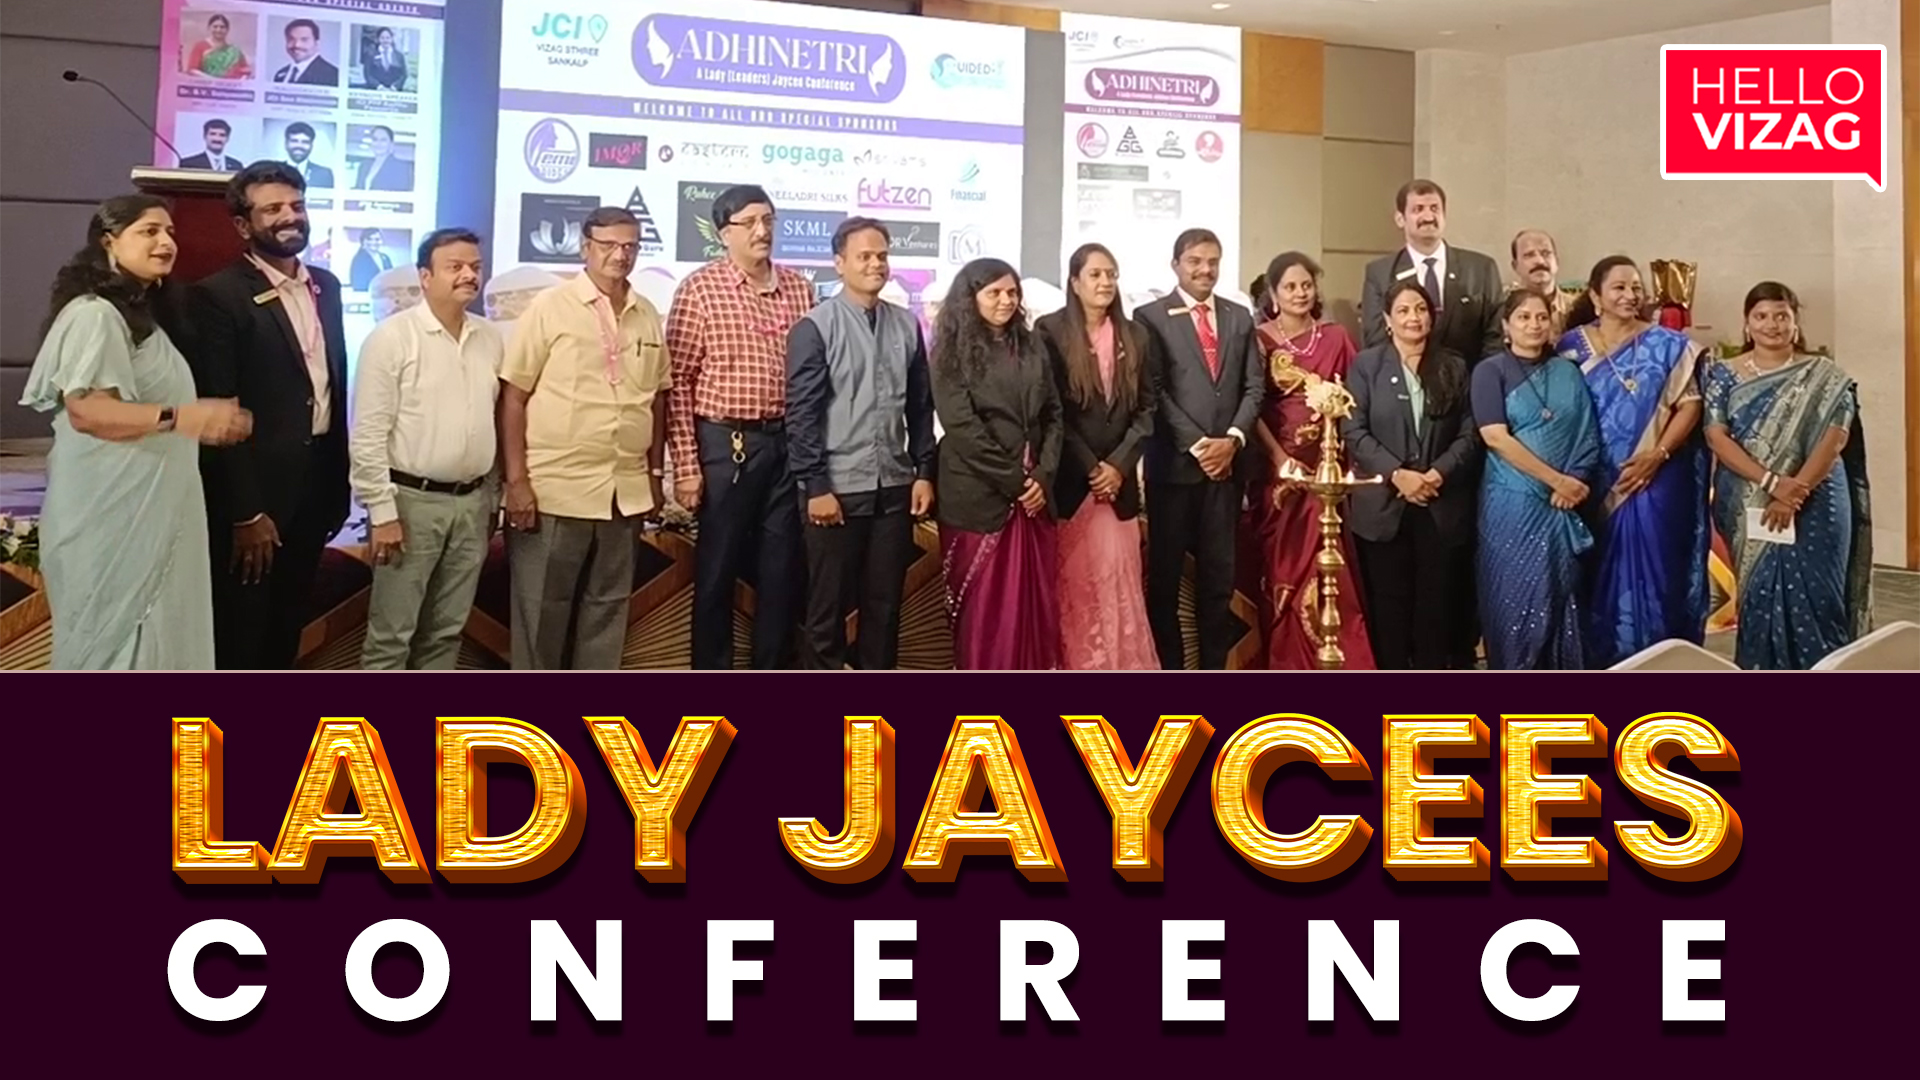 LADY JAYCEES CONFERENCE